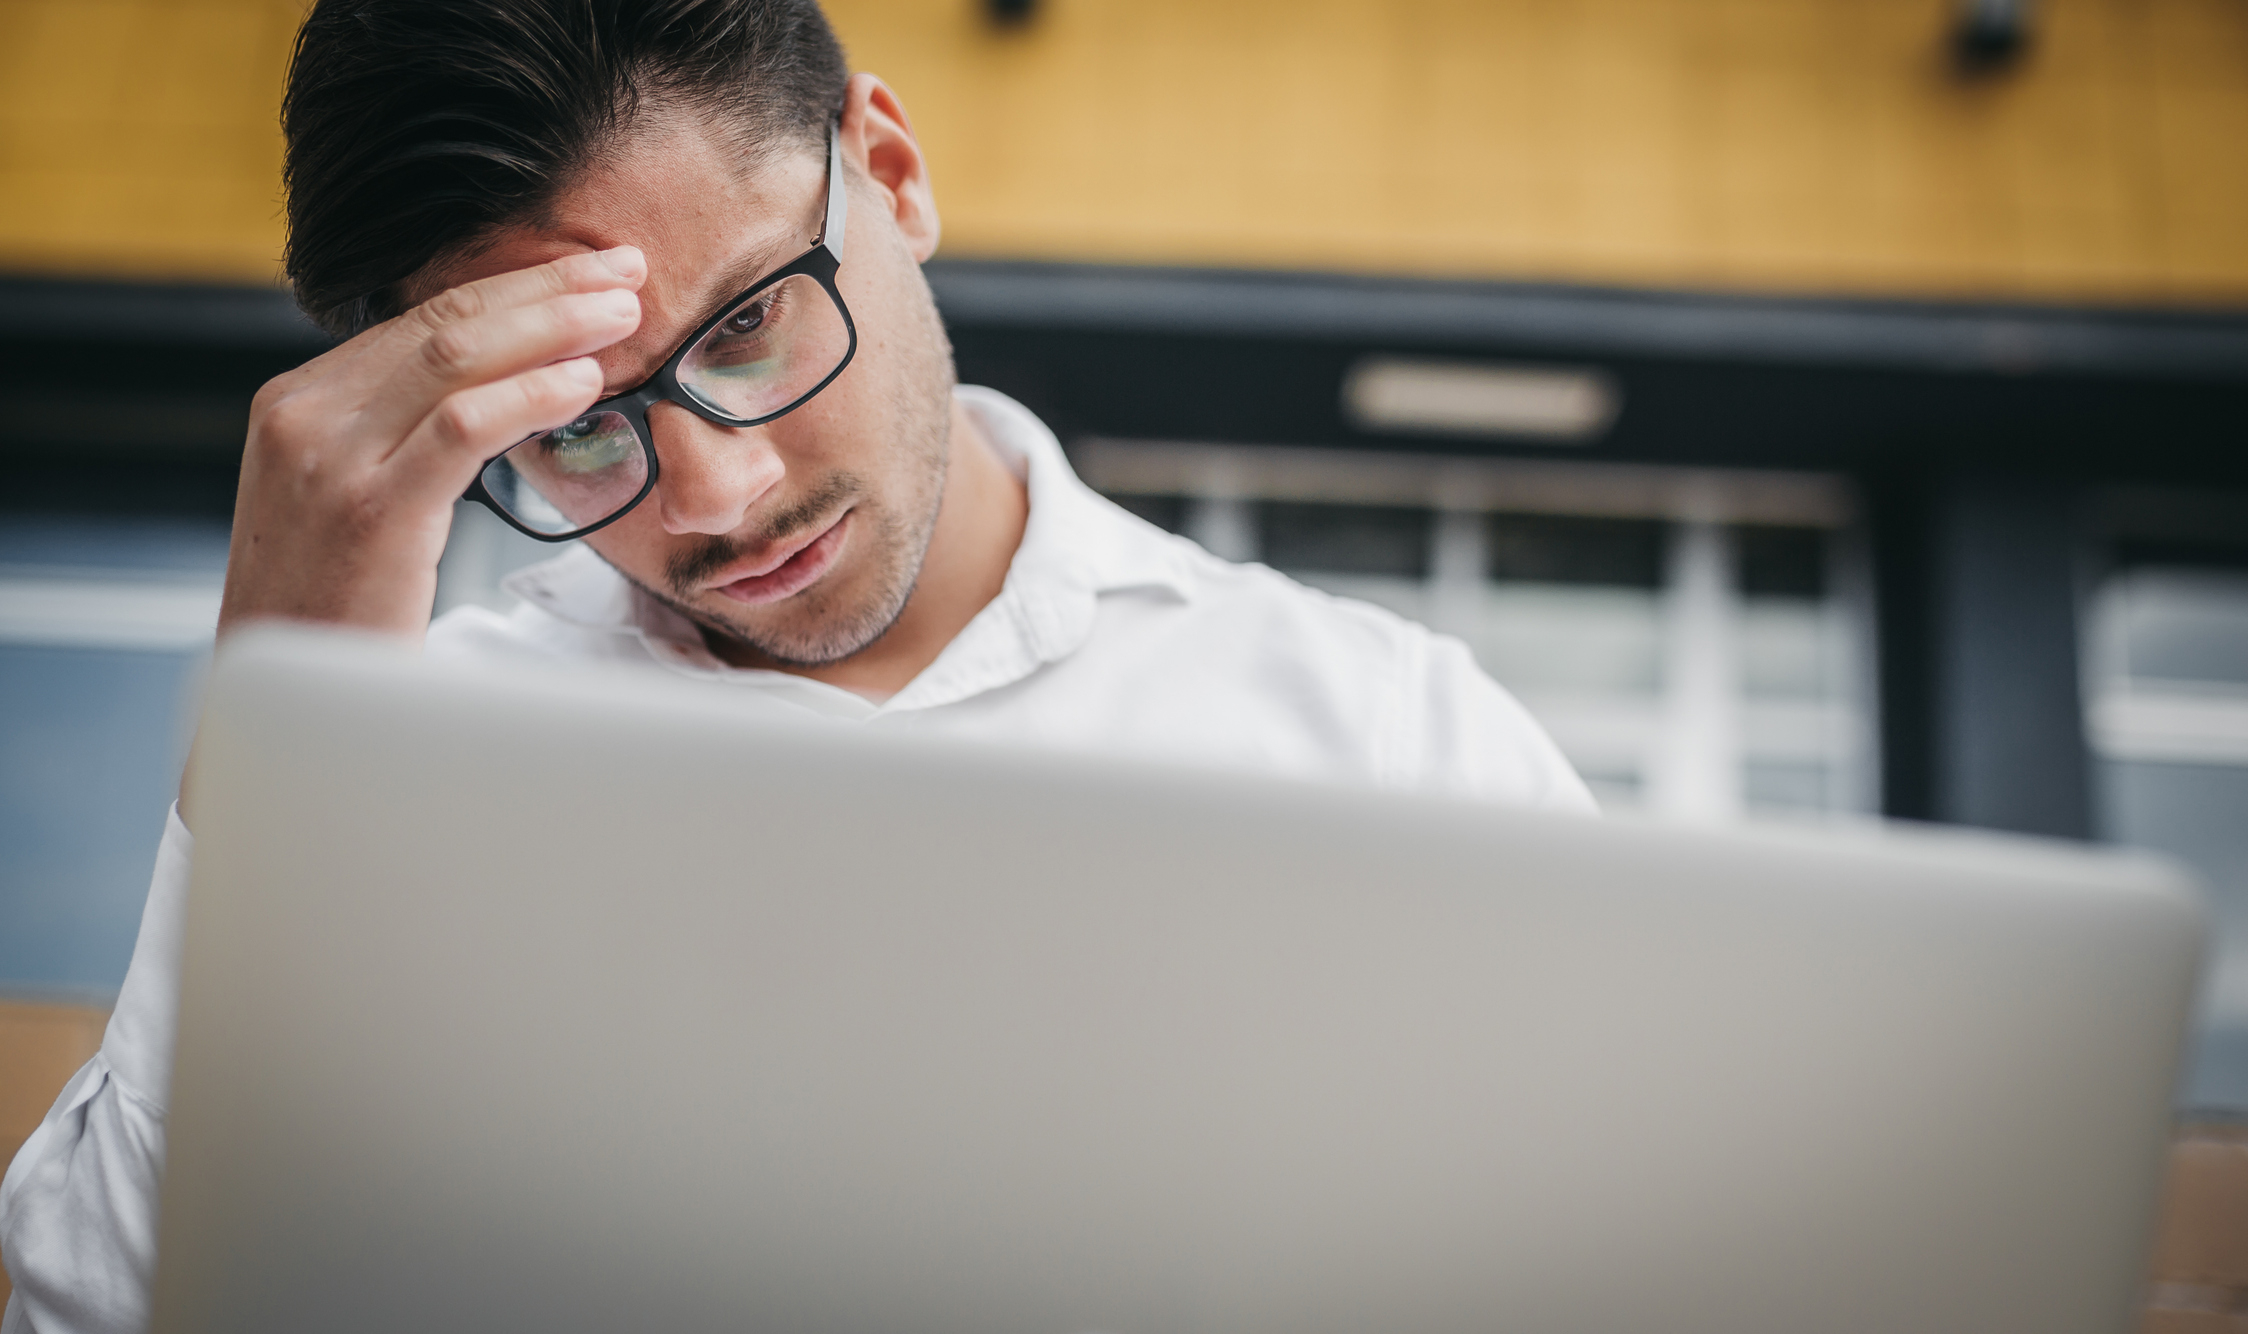 Man with glasses looks stressed, holding his forehead while looking at a laptop screen